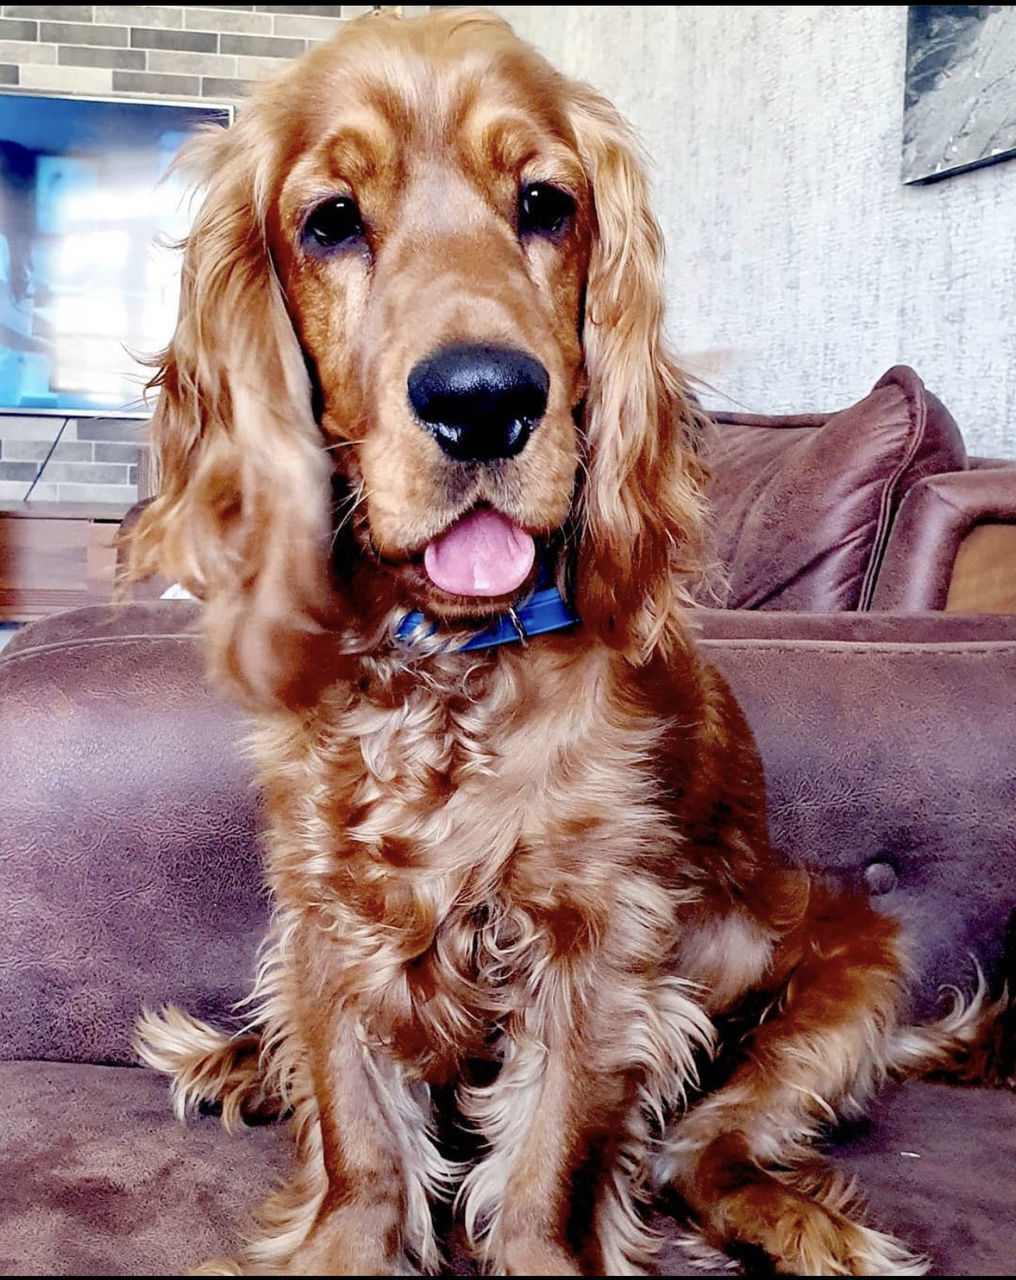 dog, canine, one animal, pet, domestic animals, animal themes, mammal, animal, setter, spaniel, portrait, irish setter, looking at camera, sitting, auto post production filter, transfer print, no people, brown, day, indoors